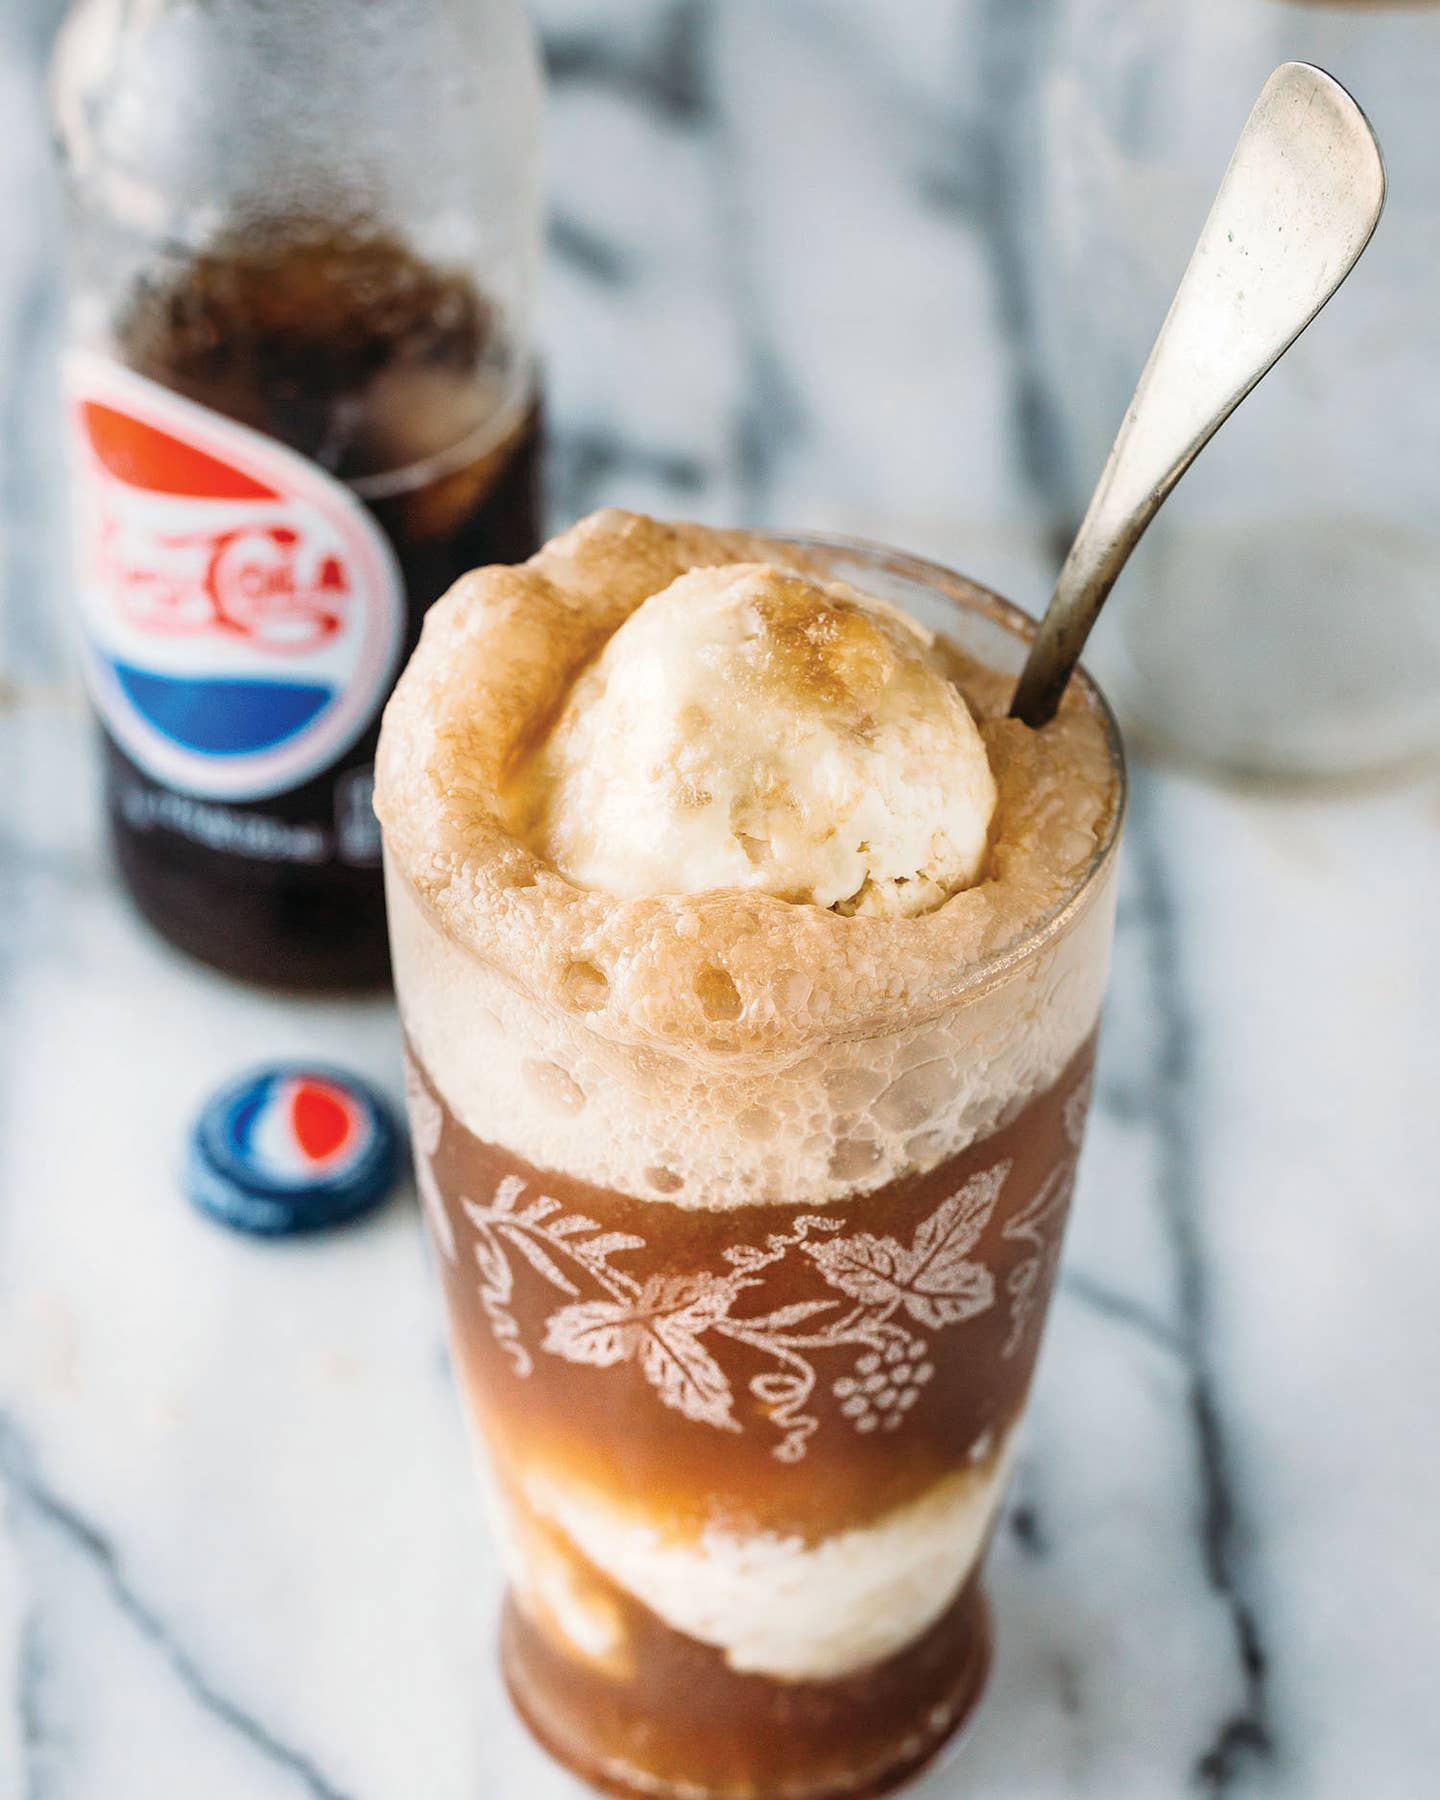 Have You Ever Tried Cola With Peanuts?